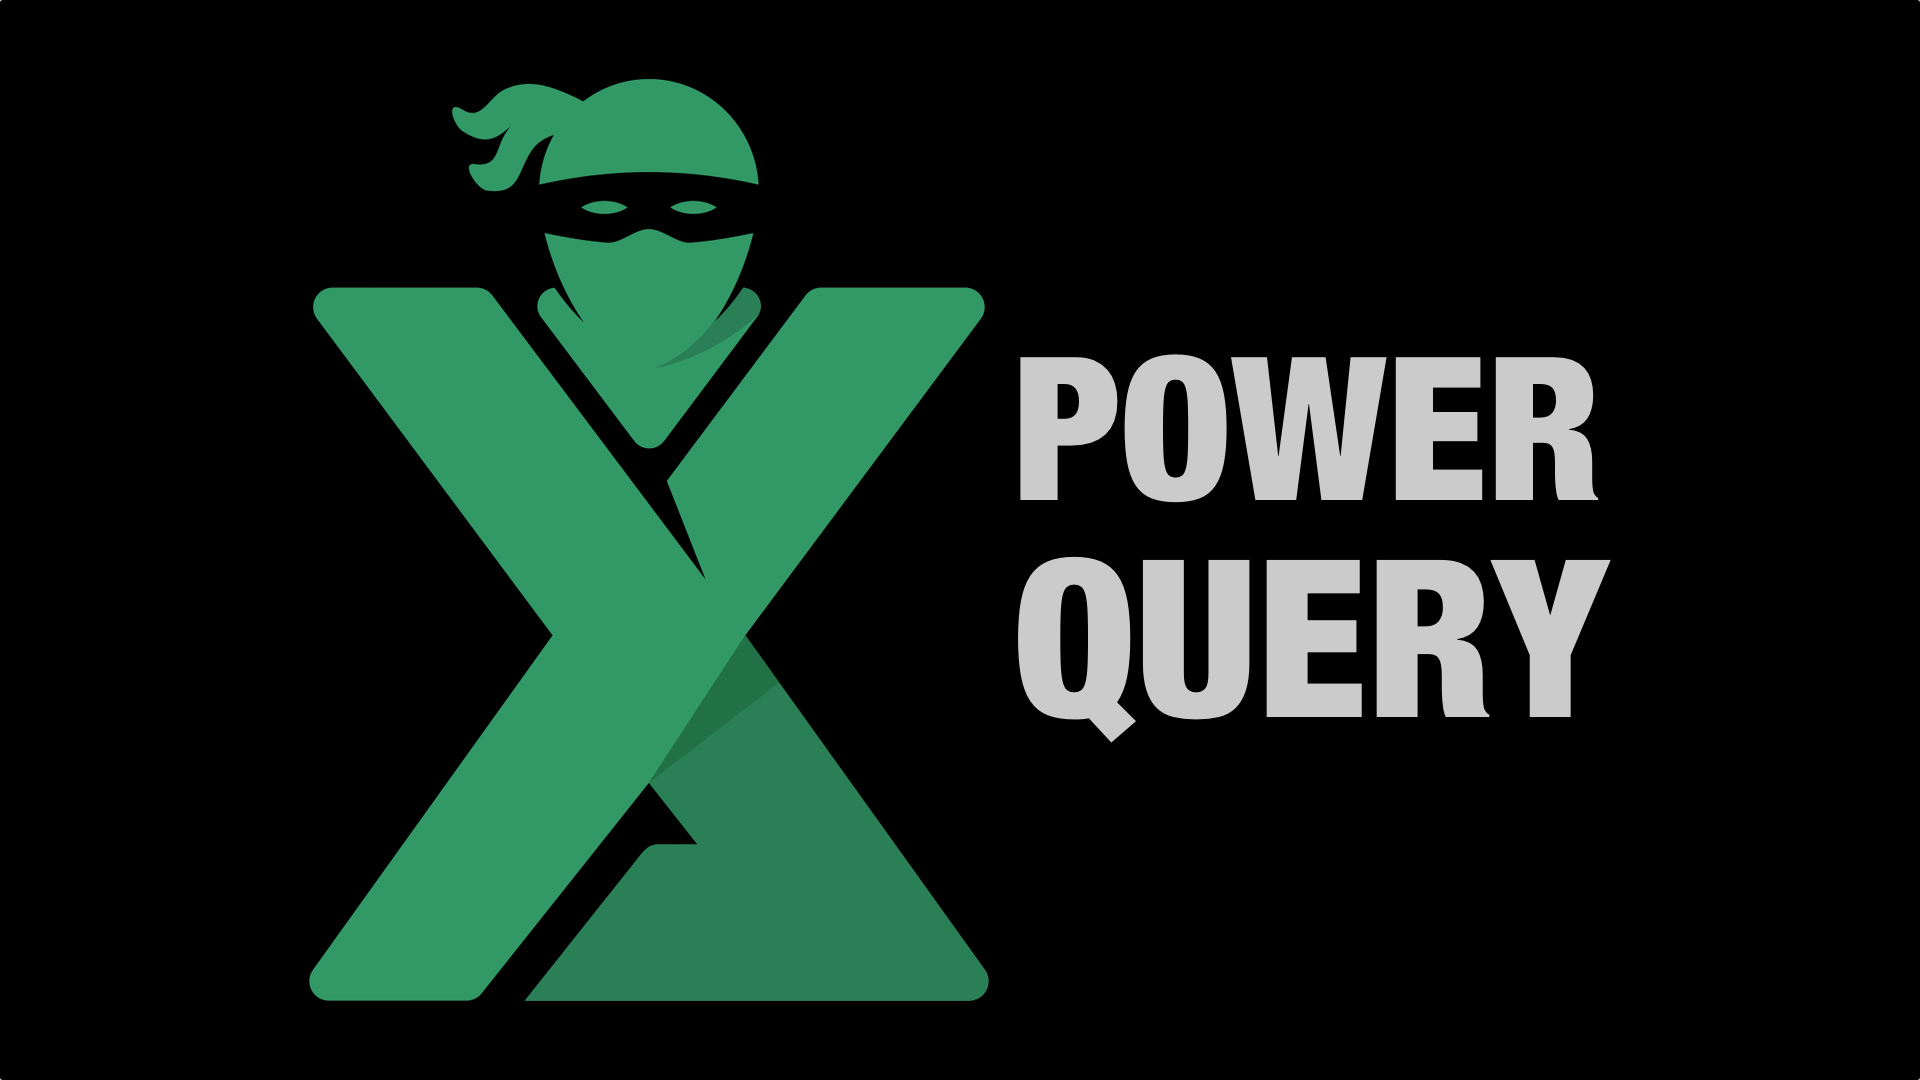 curs-online-power-query-onlearn